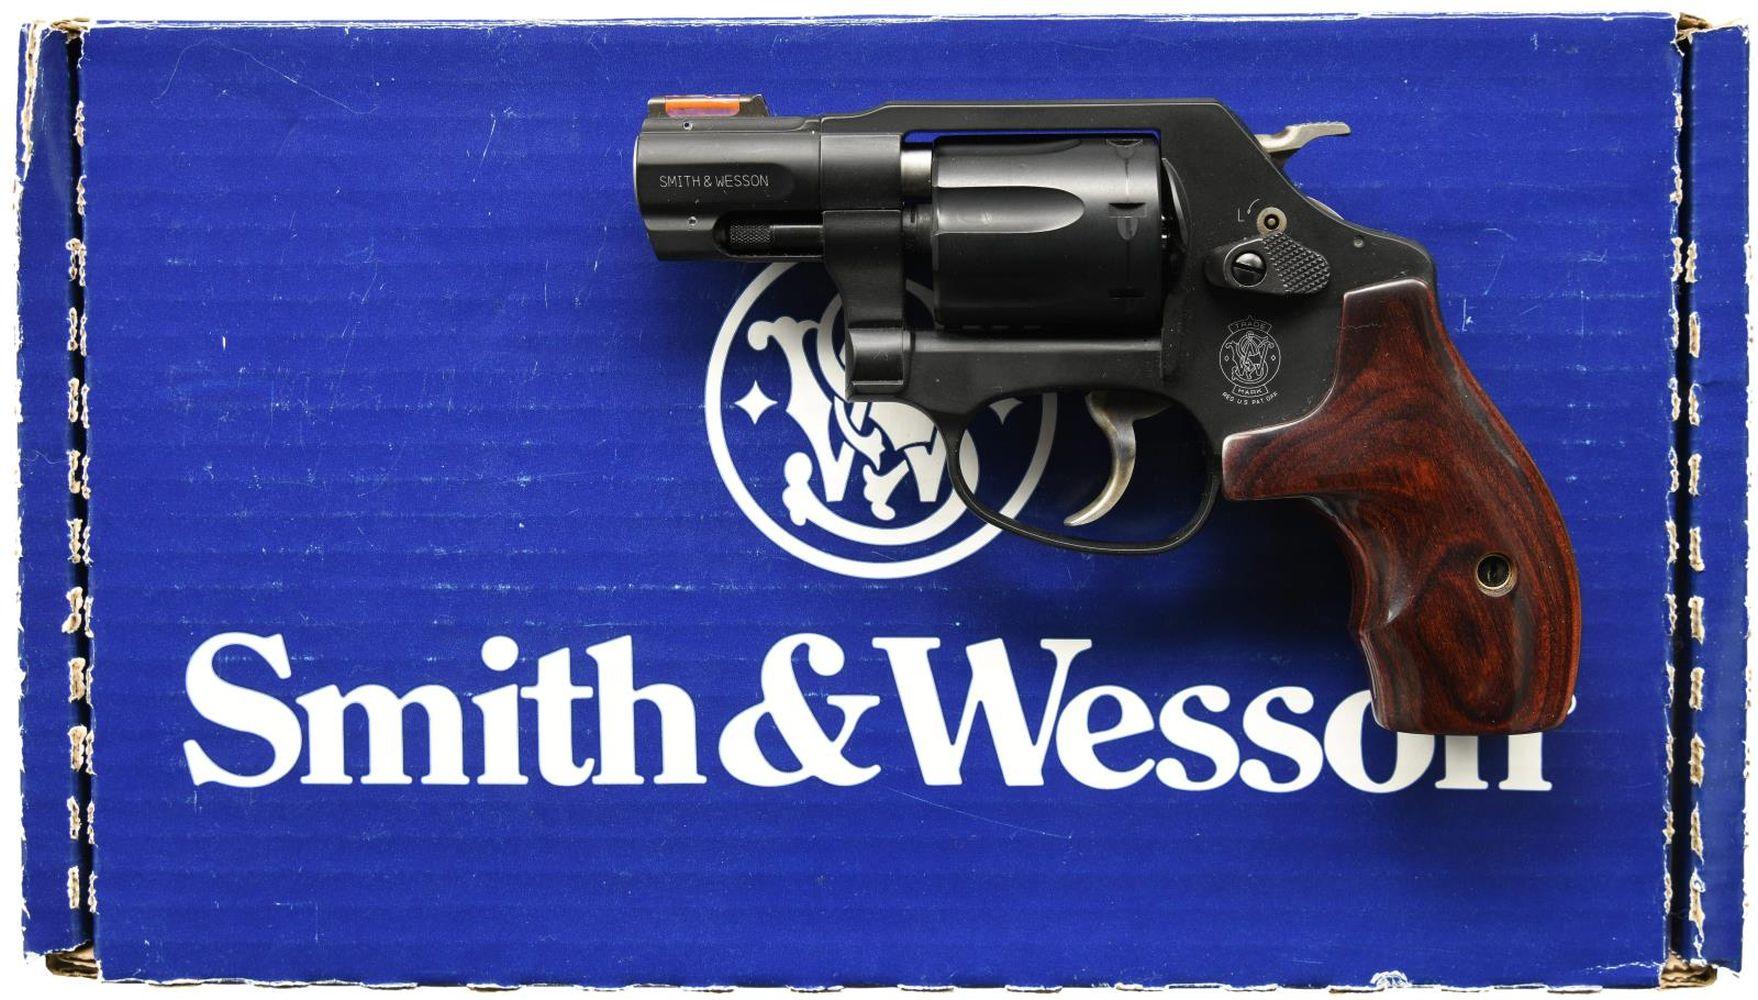 SMITH & WESSON MODEL 351 PD DOUBLE ACTION REVOLVER